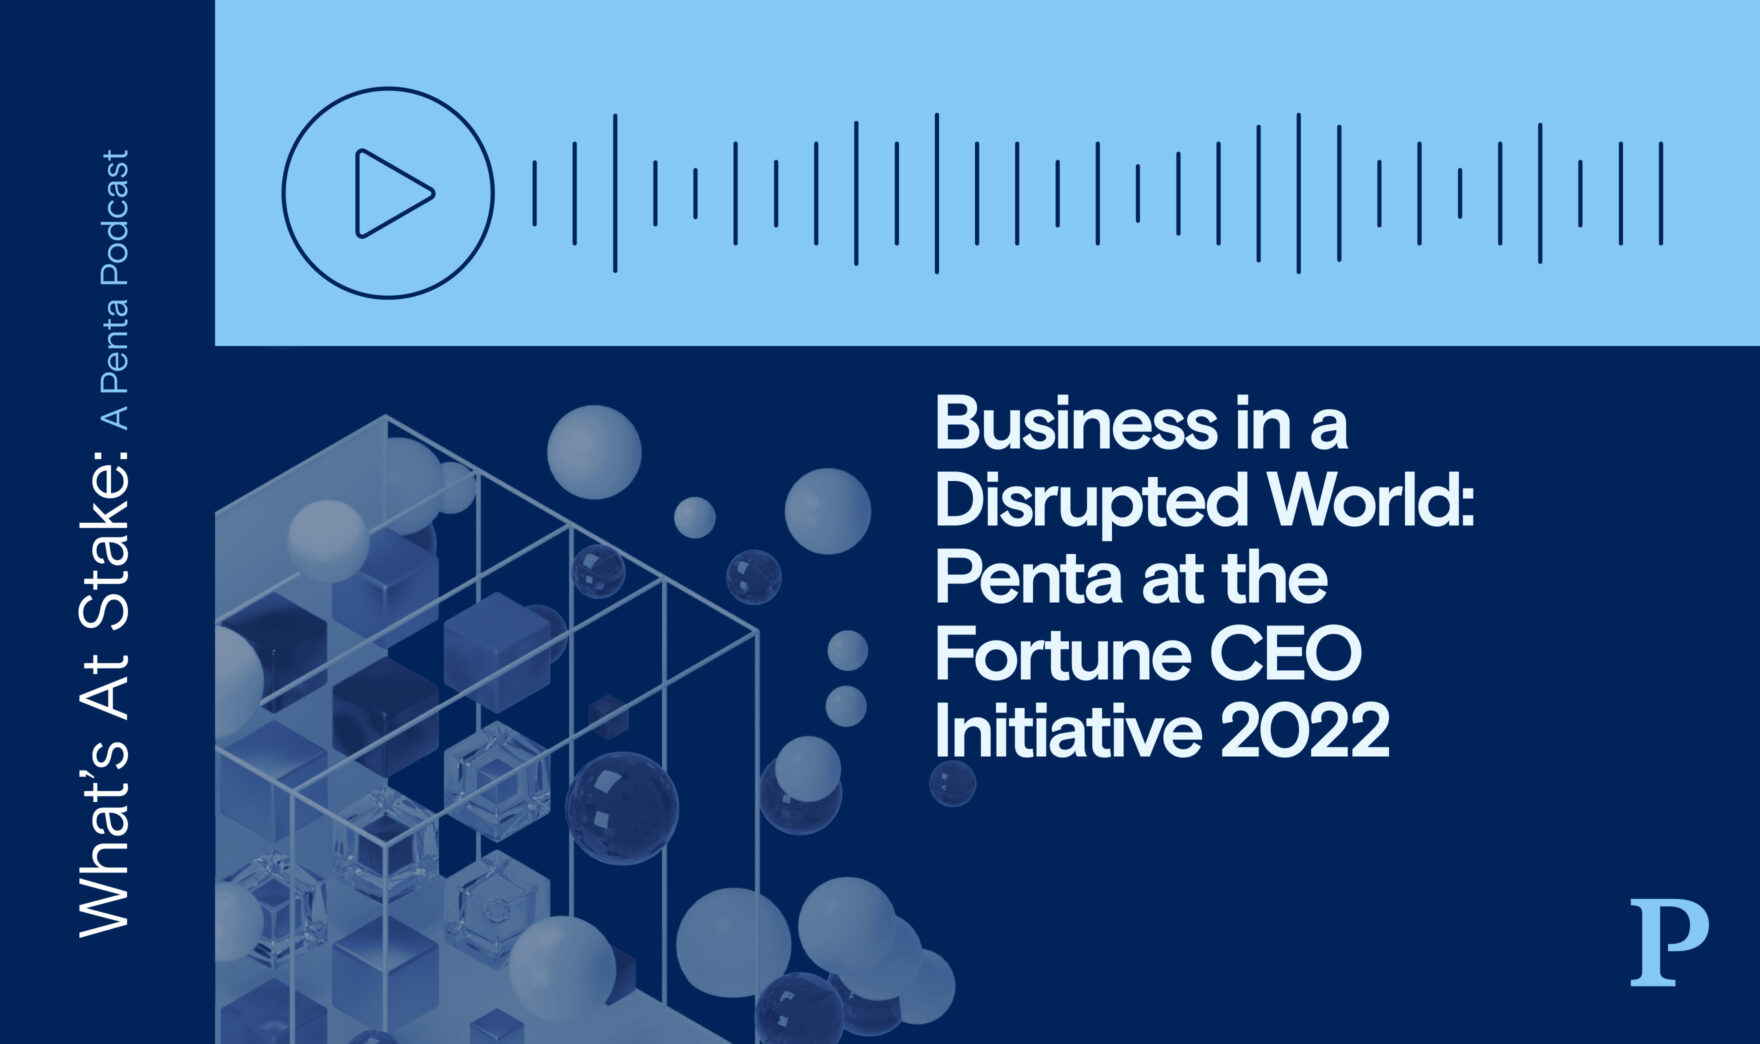 Business in a Disrupted World: Penta at the Fortune CEO Initiative 2022